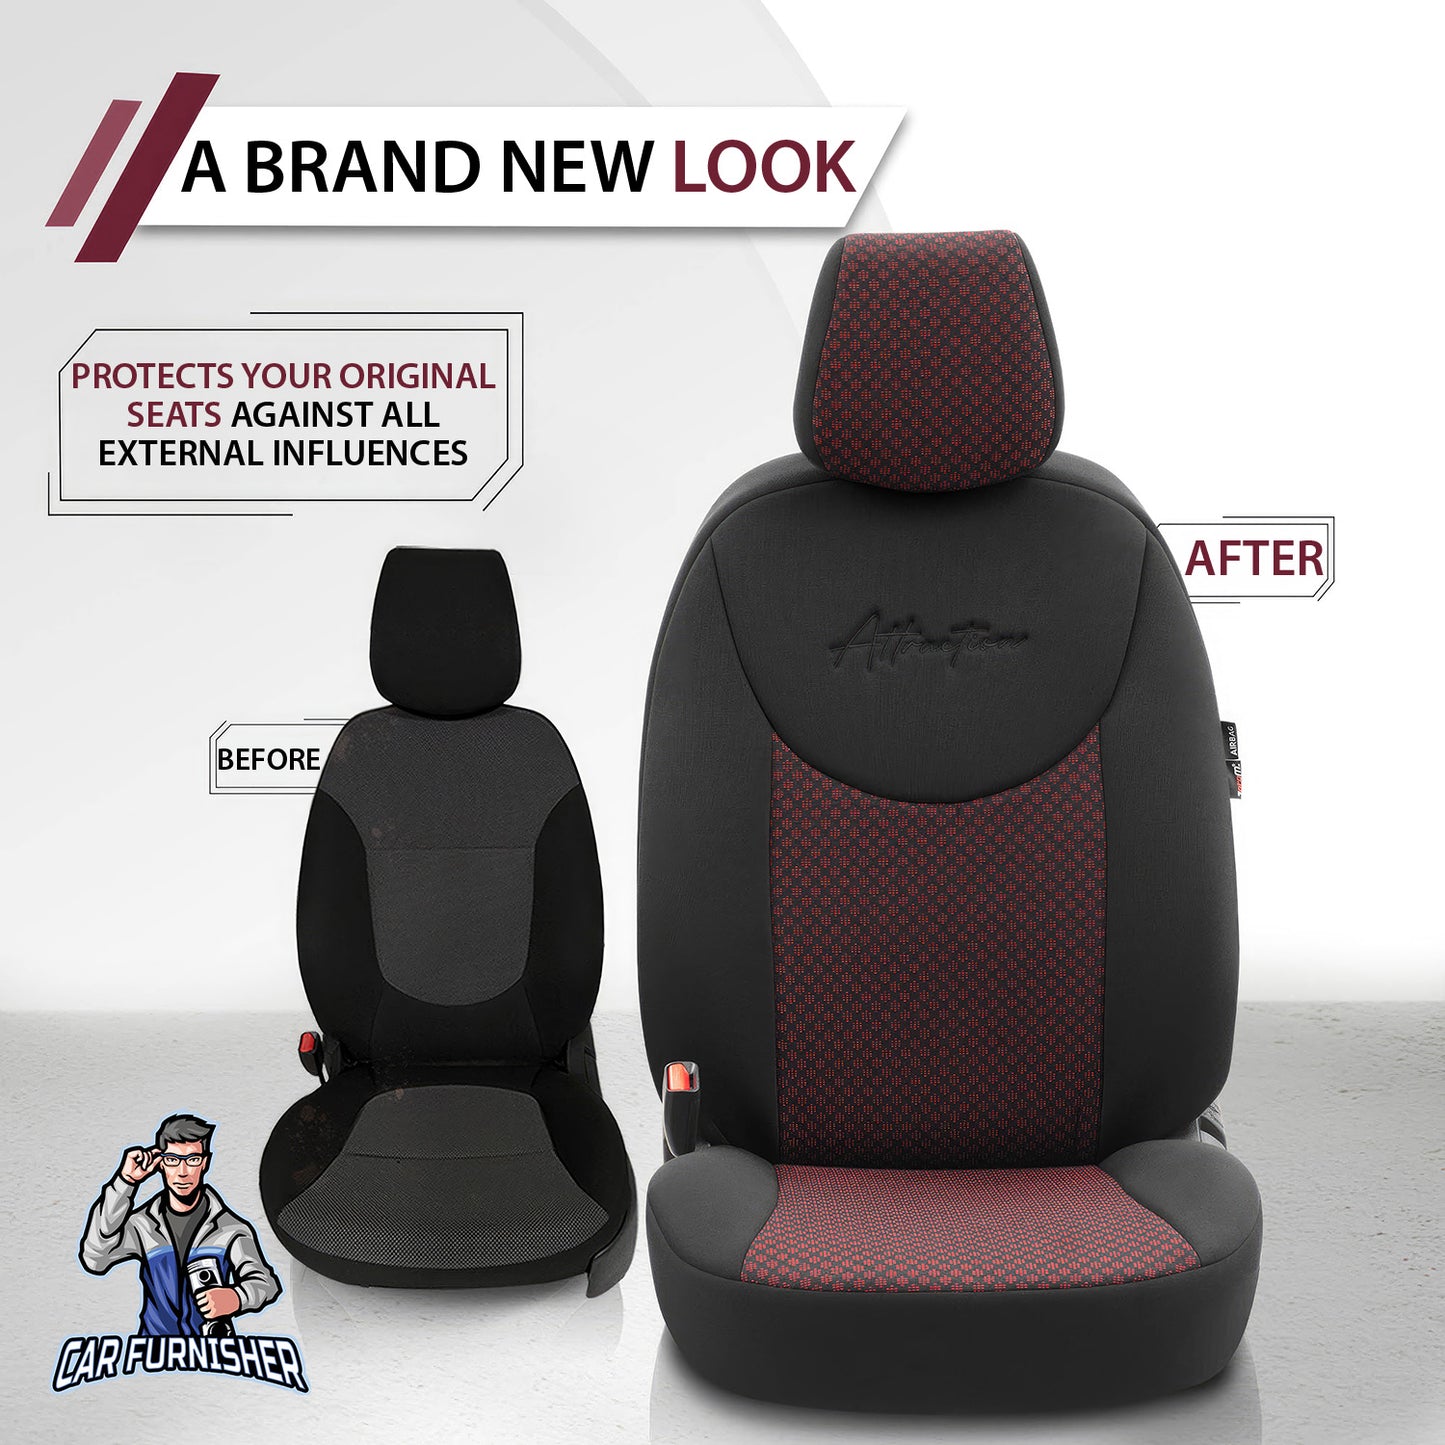 Car Seat Cover Set - Attraction Design Burgundy 5 Seats + Headrests (Full Set) Cotton Fabric